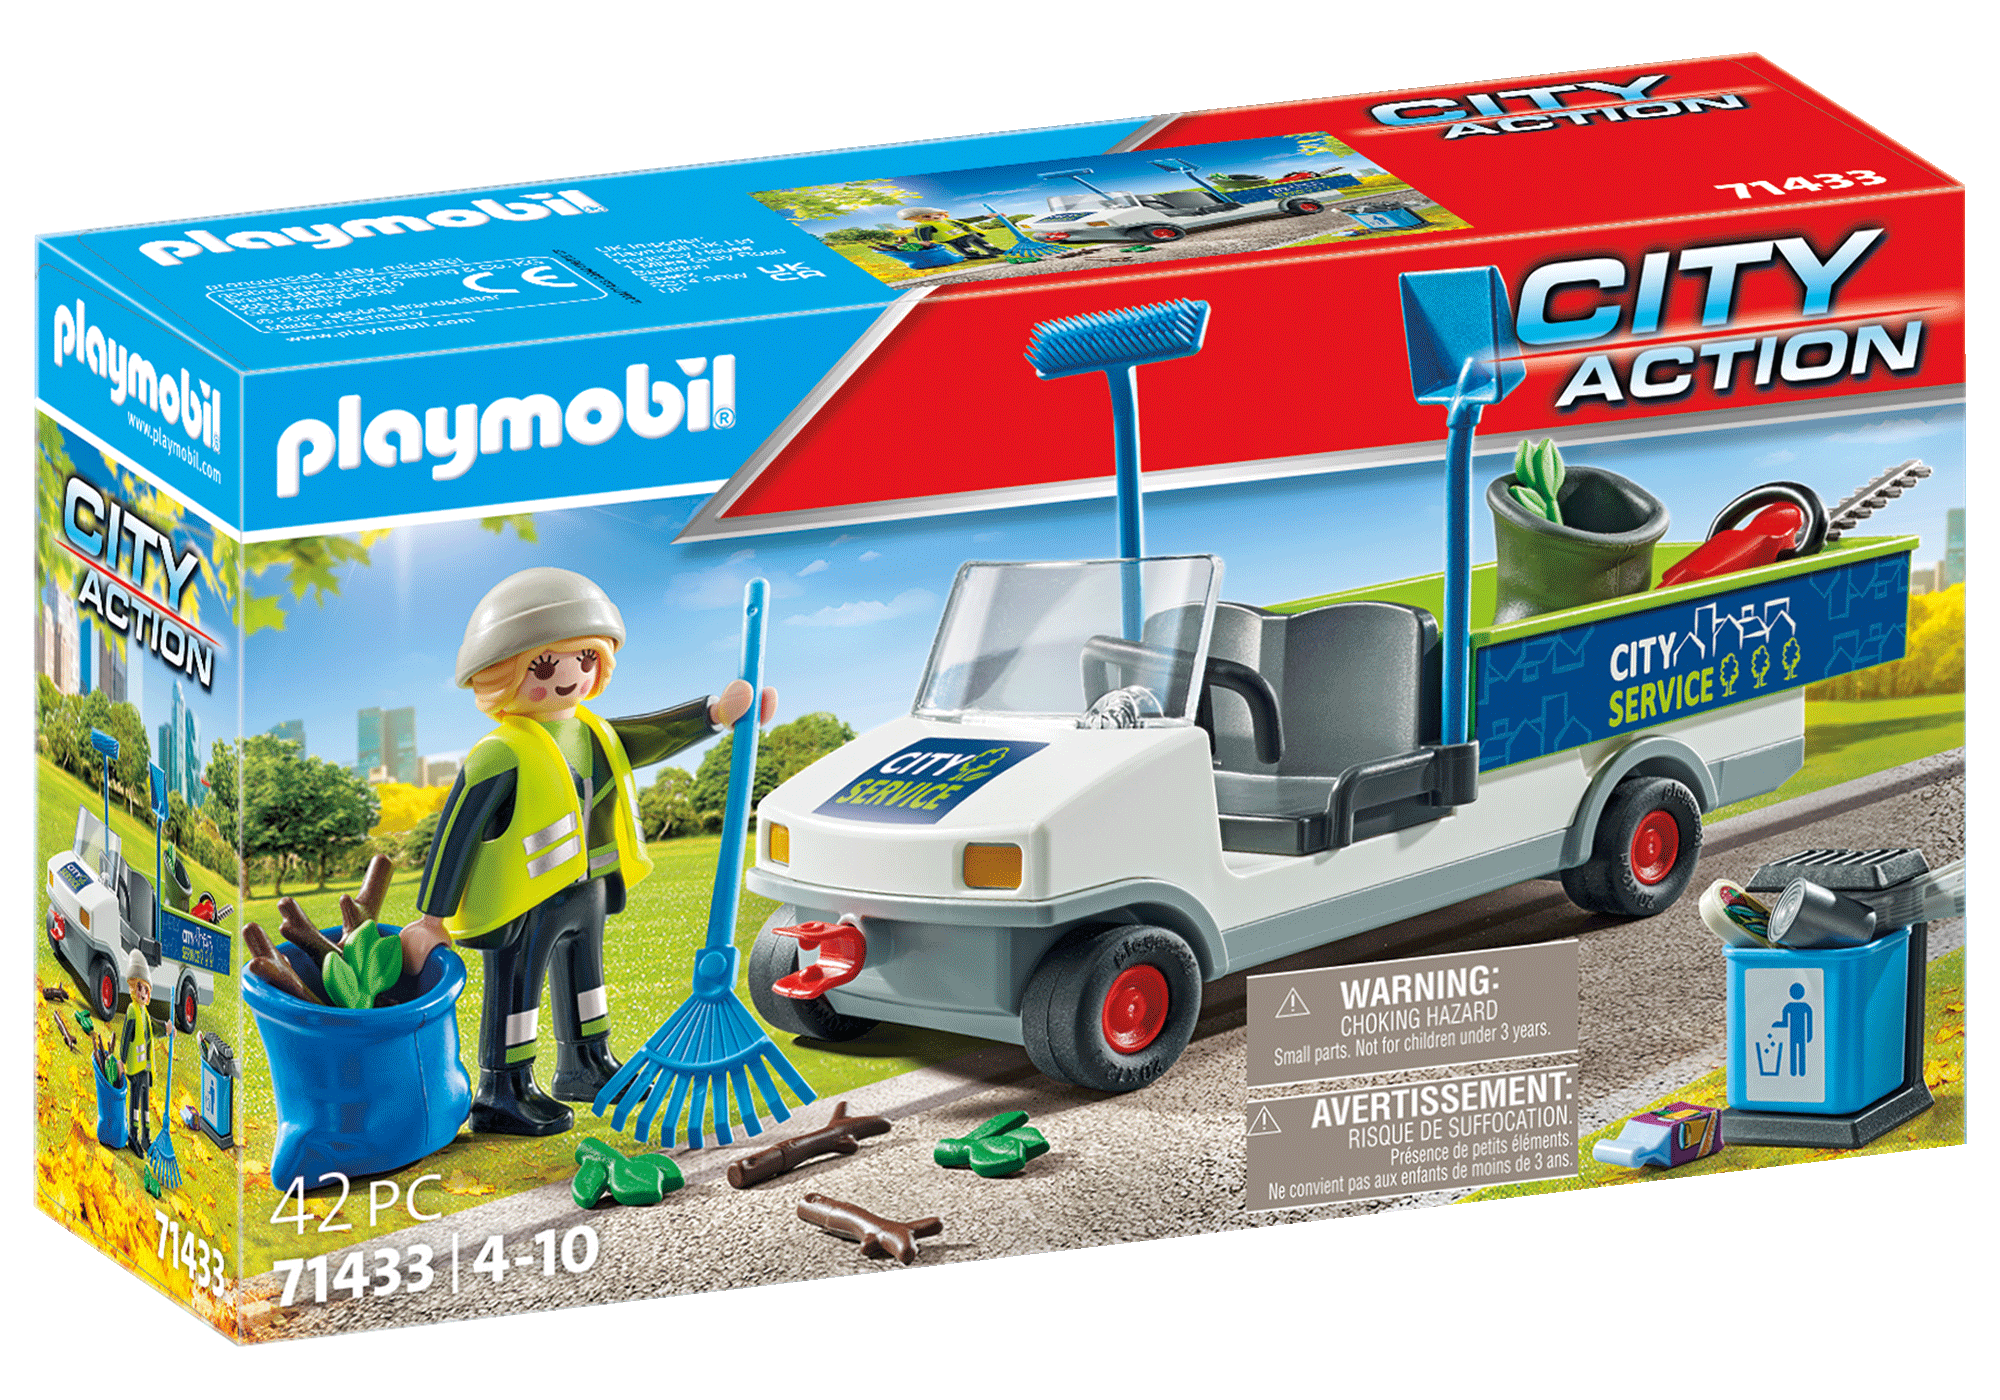 Playmobil City Action Street Cleaner E-Vehicle